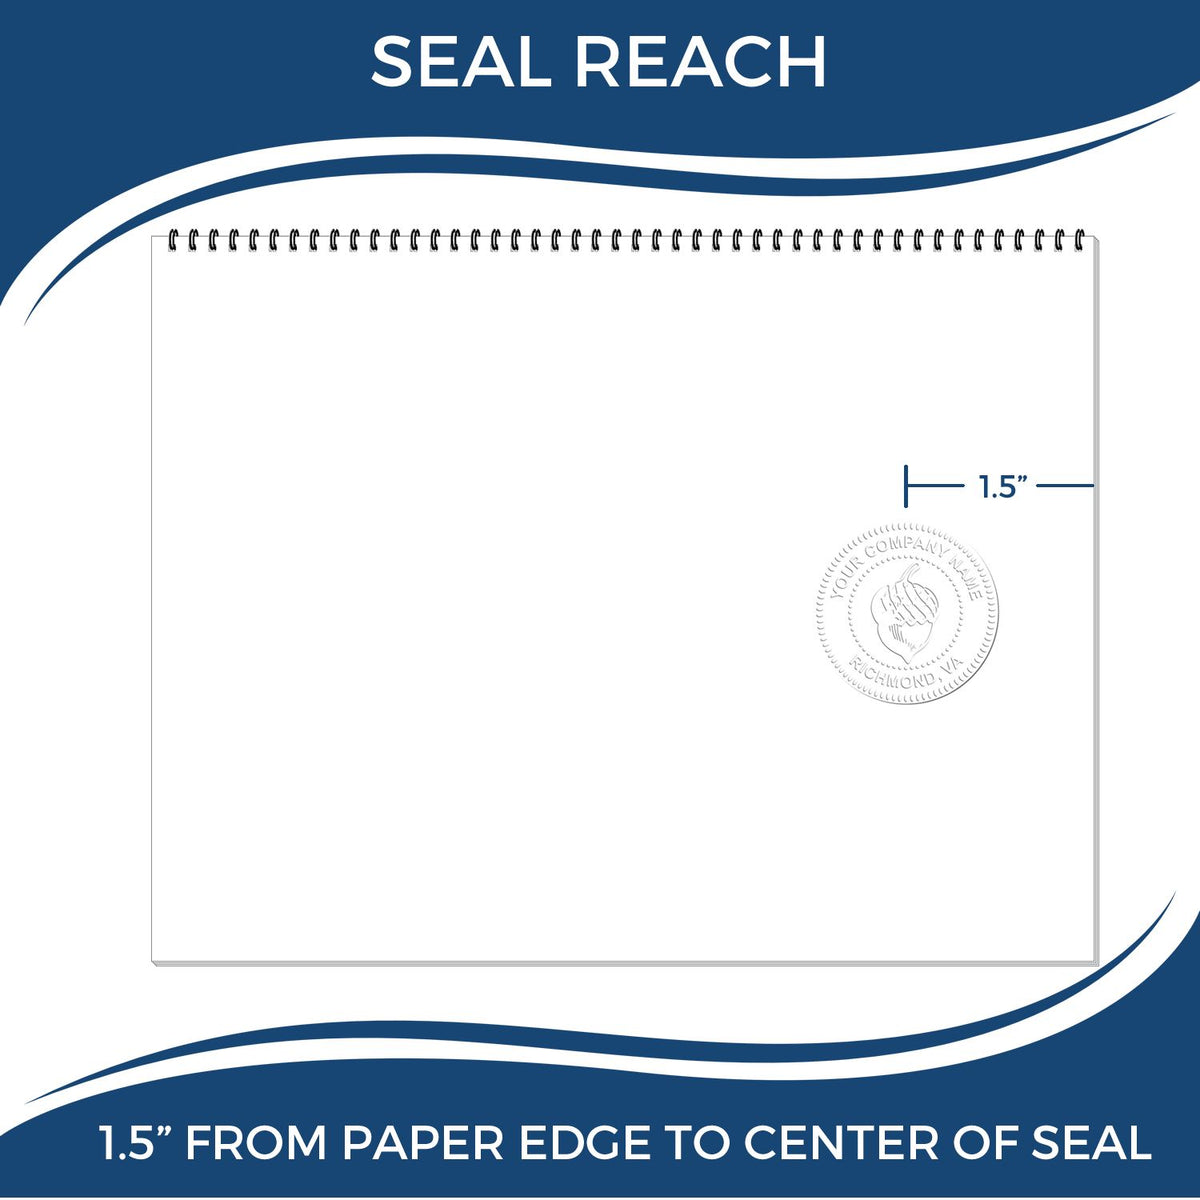 An infographic showing the seal reach which is represented by a ruler and a miniature seal image of the Missouri Engineer Desk Seal